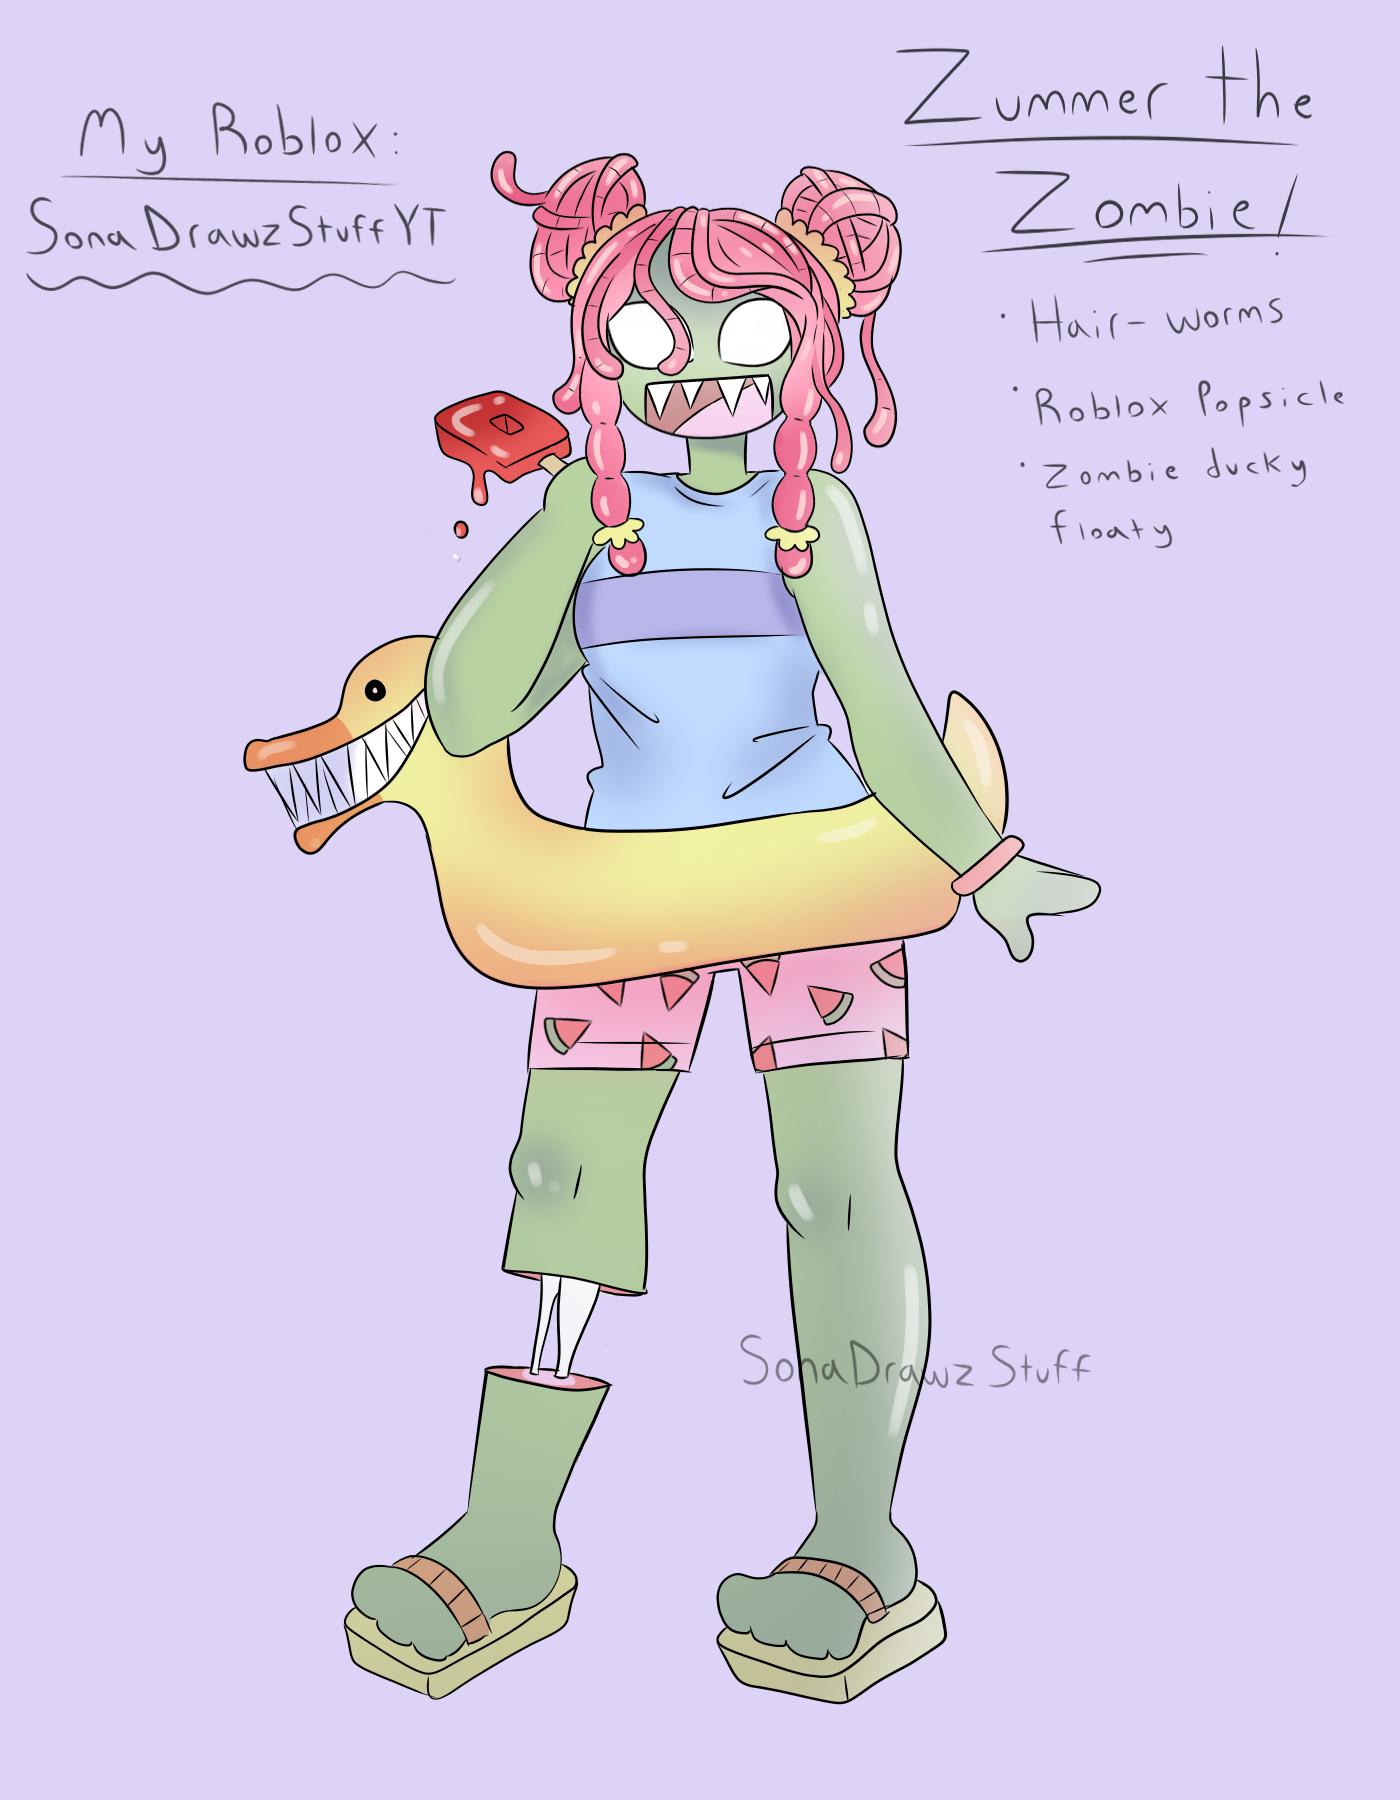 Sonaspookzstuff On Twitter My Roblox Rthro Contest Entry I Hope You Like It Uwu Robloxrthrocontest - real life worm roblox